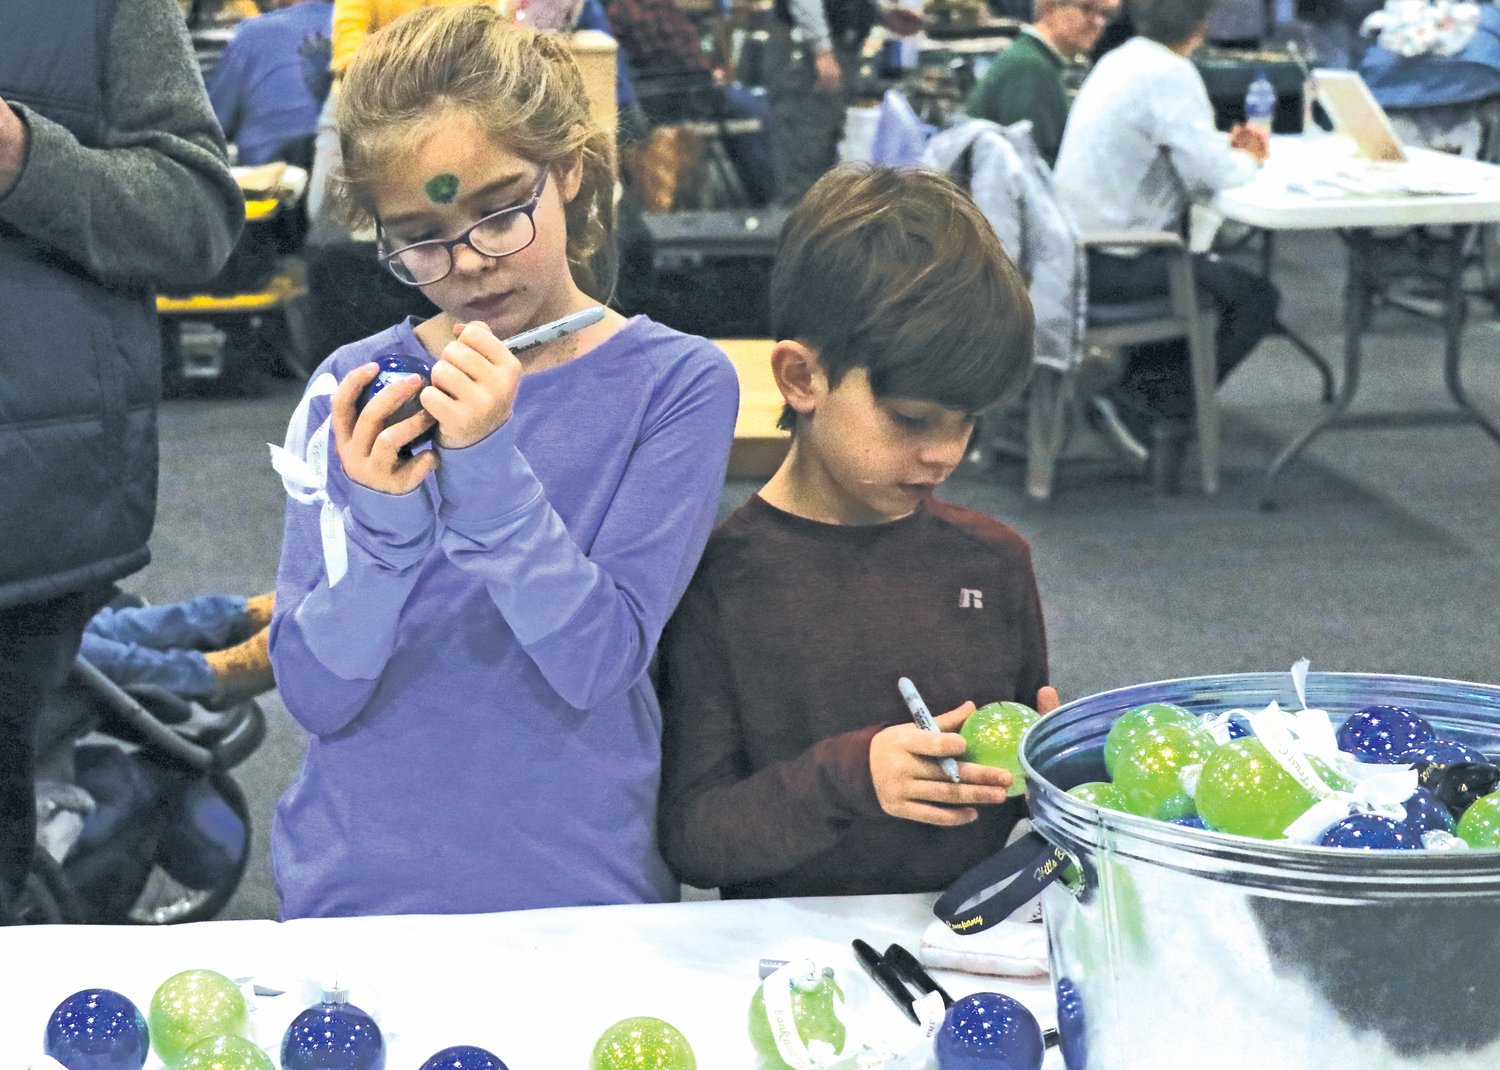 Joey, left, and Axel decorate ornaments, sponsored by Hills Bank.